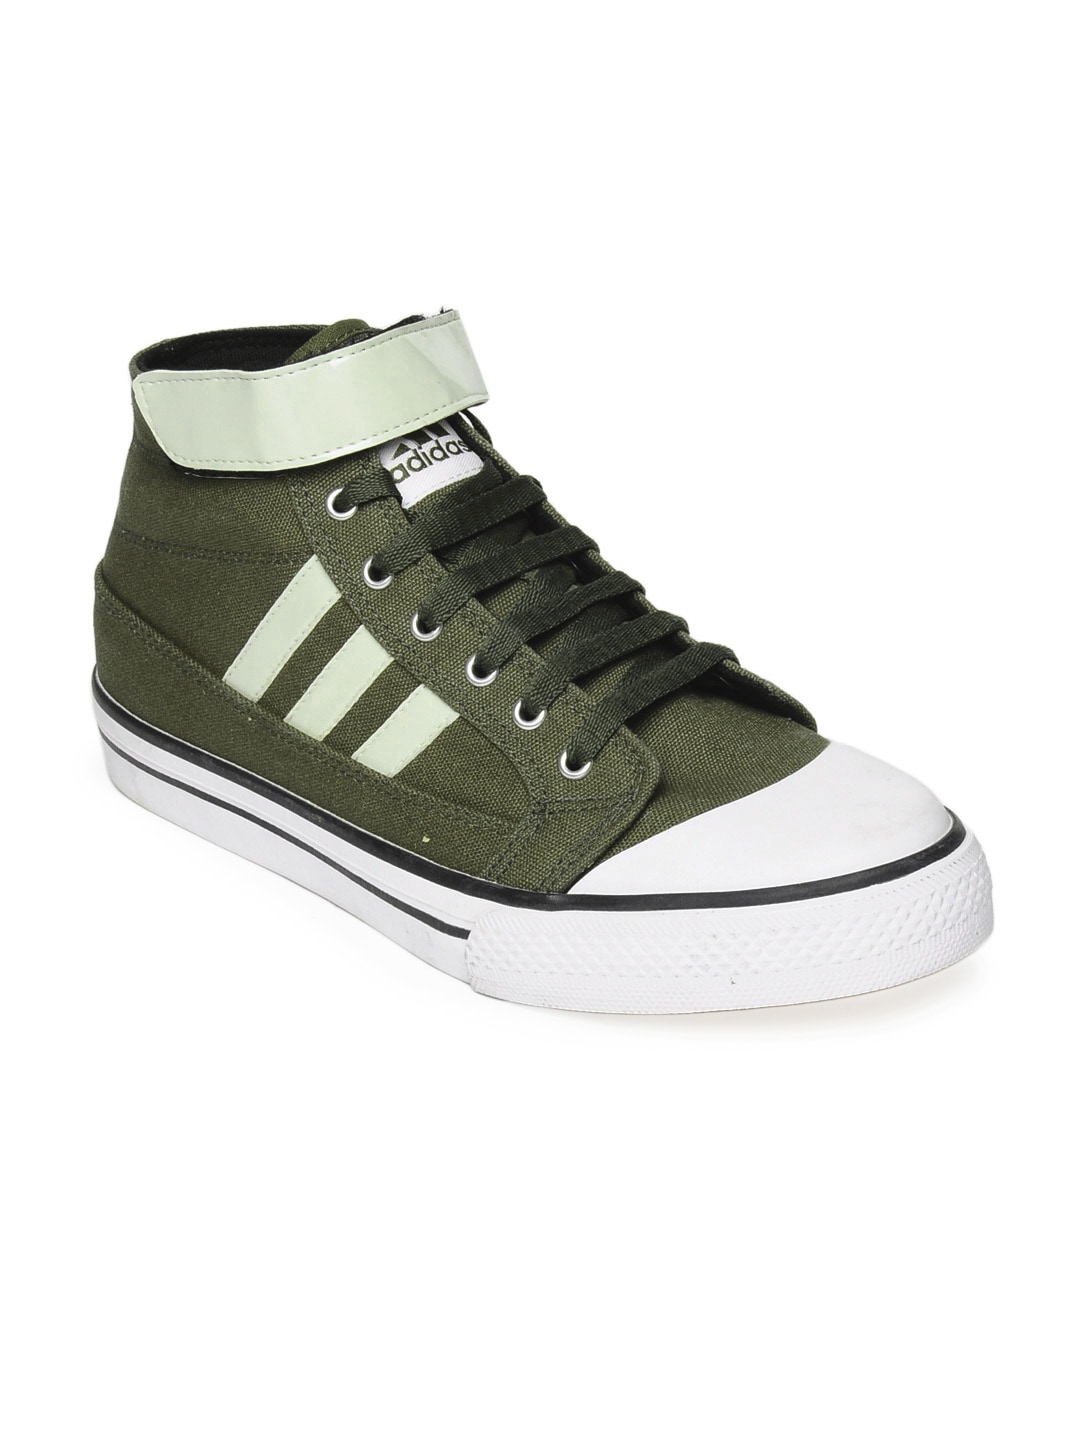 ADIDAS Unisex High Can Oak Olive Shoes